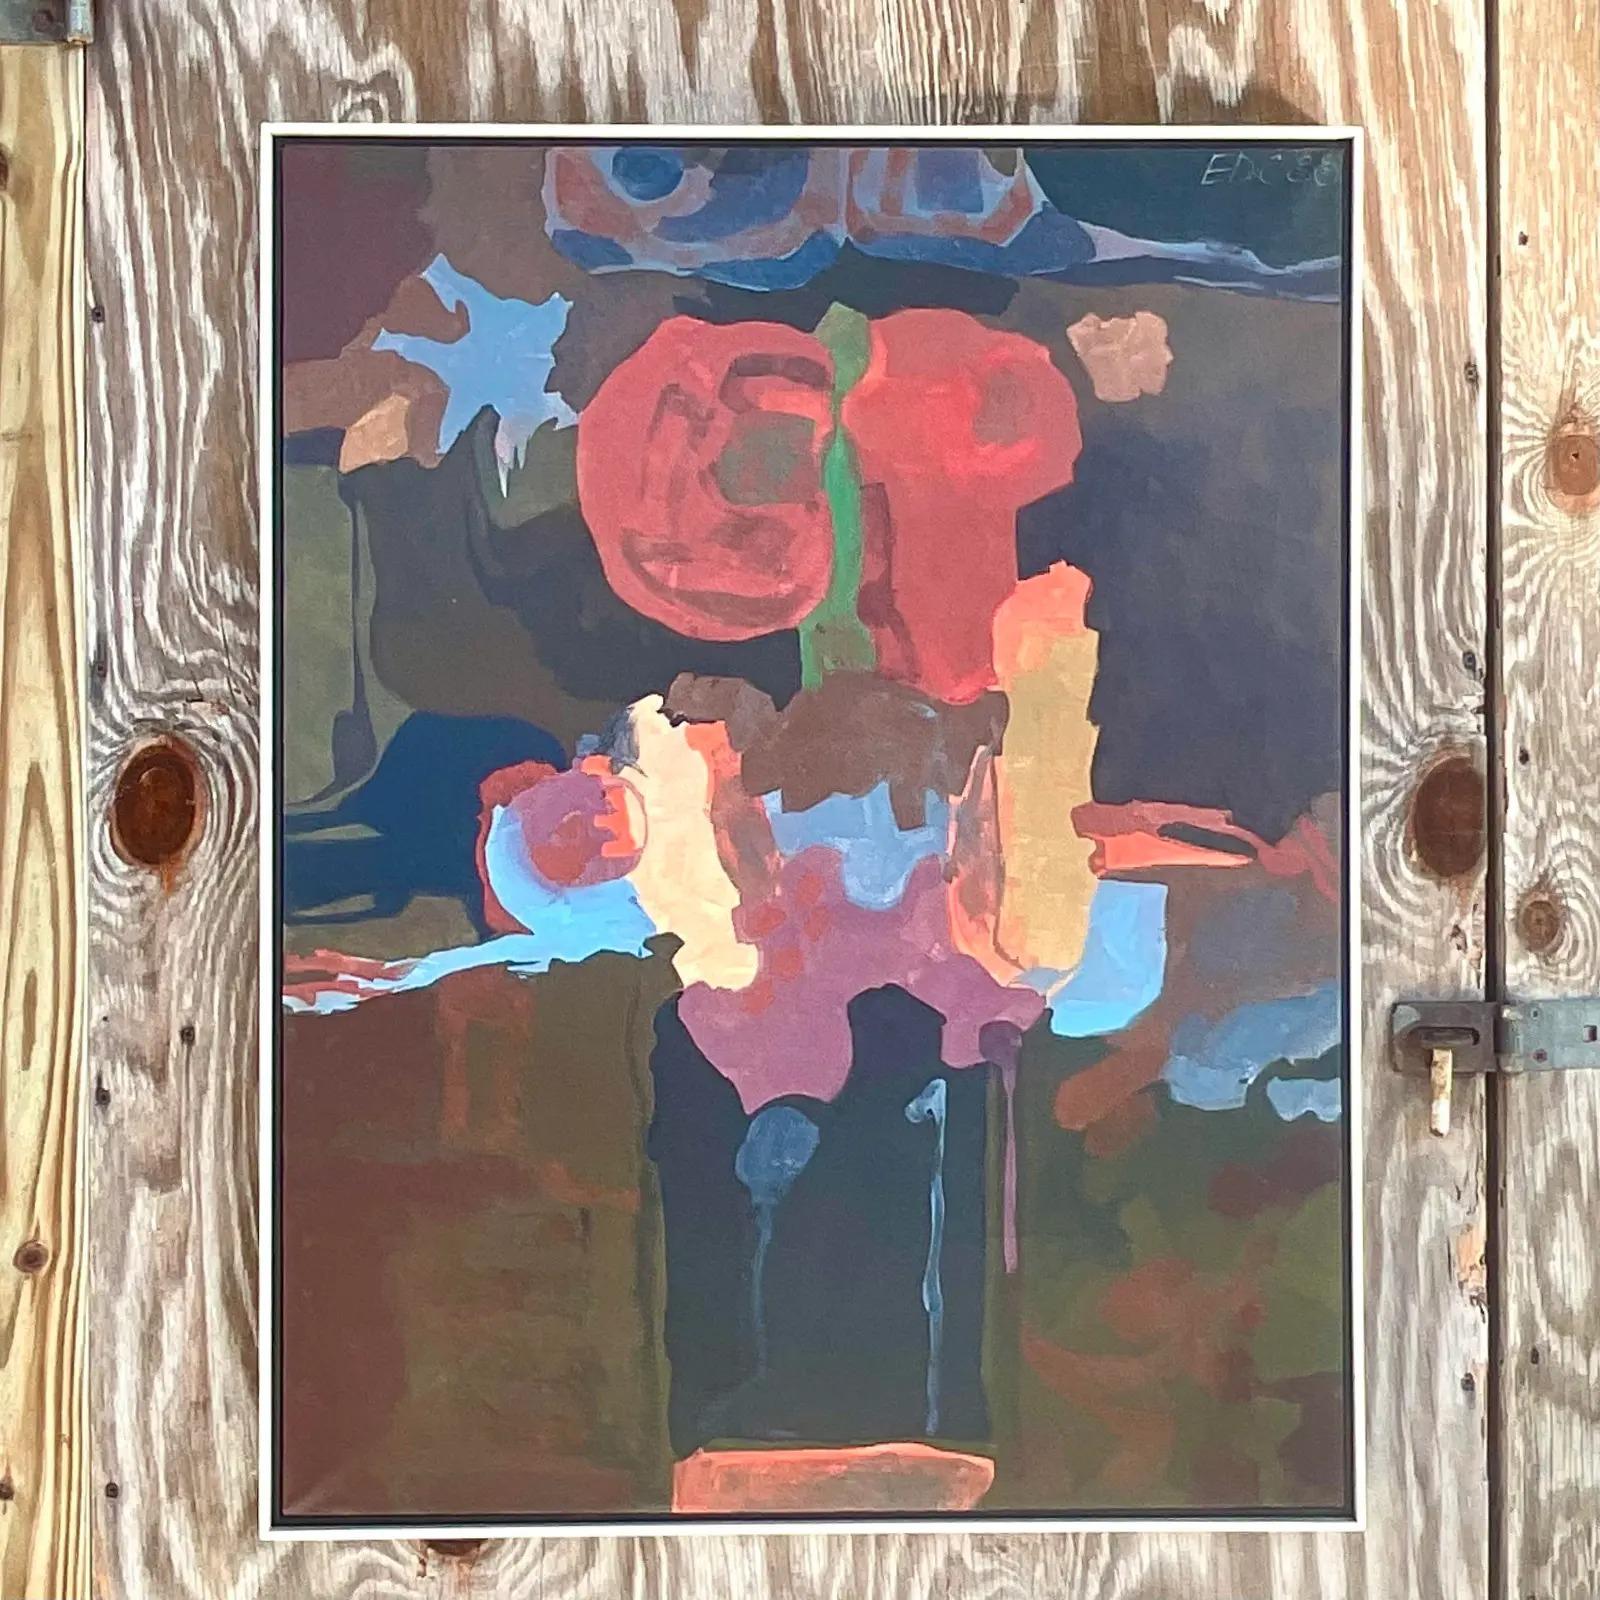 A fantastic vintage Boho original oil painting. Gorgeous deep rich colors in a striking abstract composition. Signed and dated by the artist Crisp, 1988. Acquired from a Palm Beach estate.